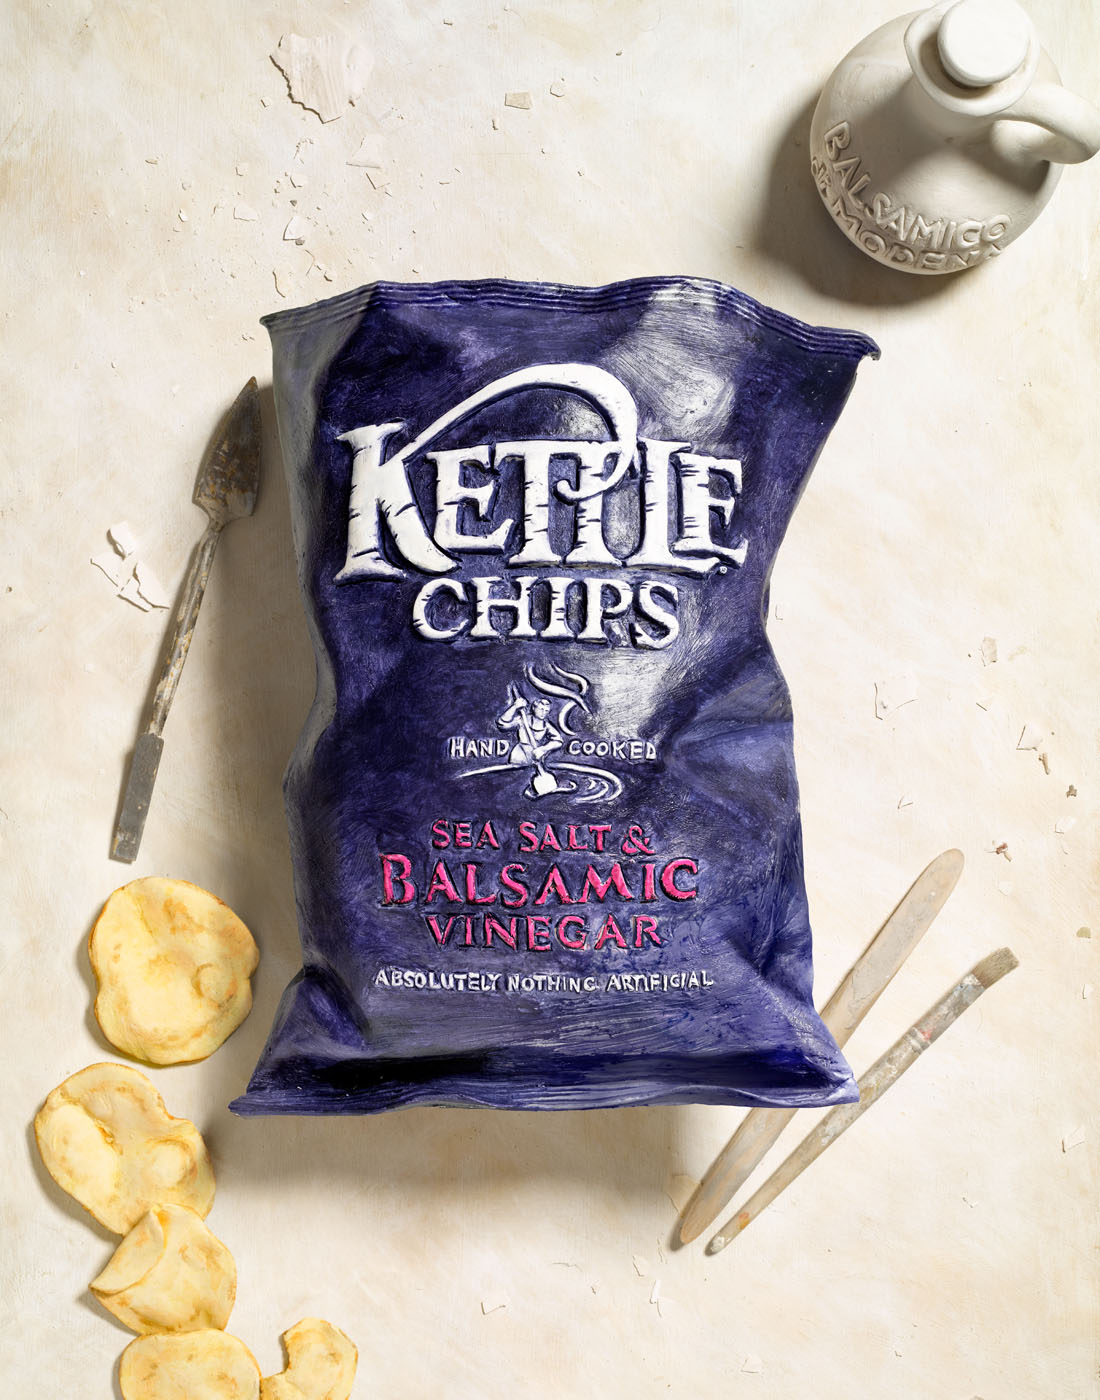 Clay Kettle Chips packet by Alexander Kent London based still life and product photographer.